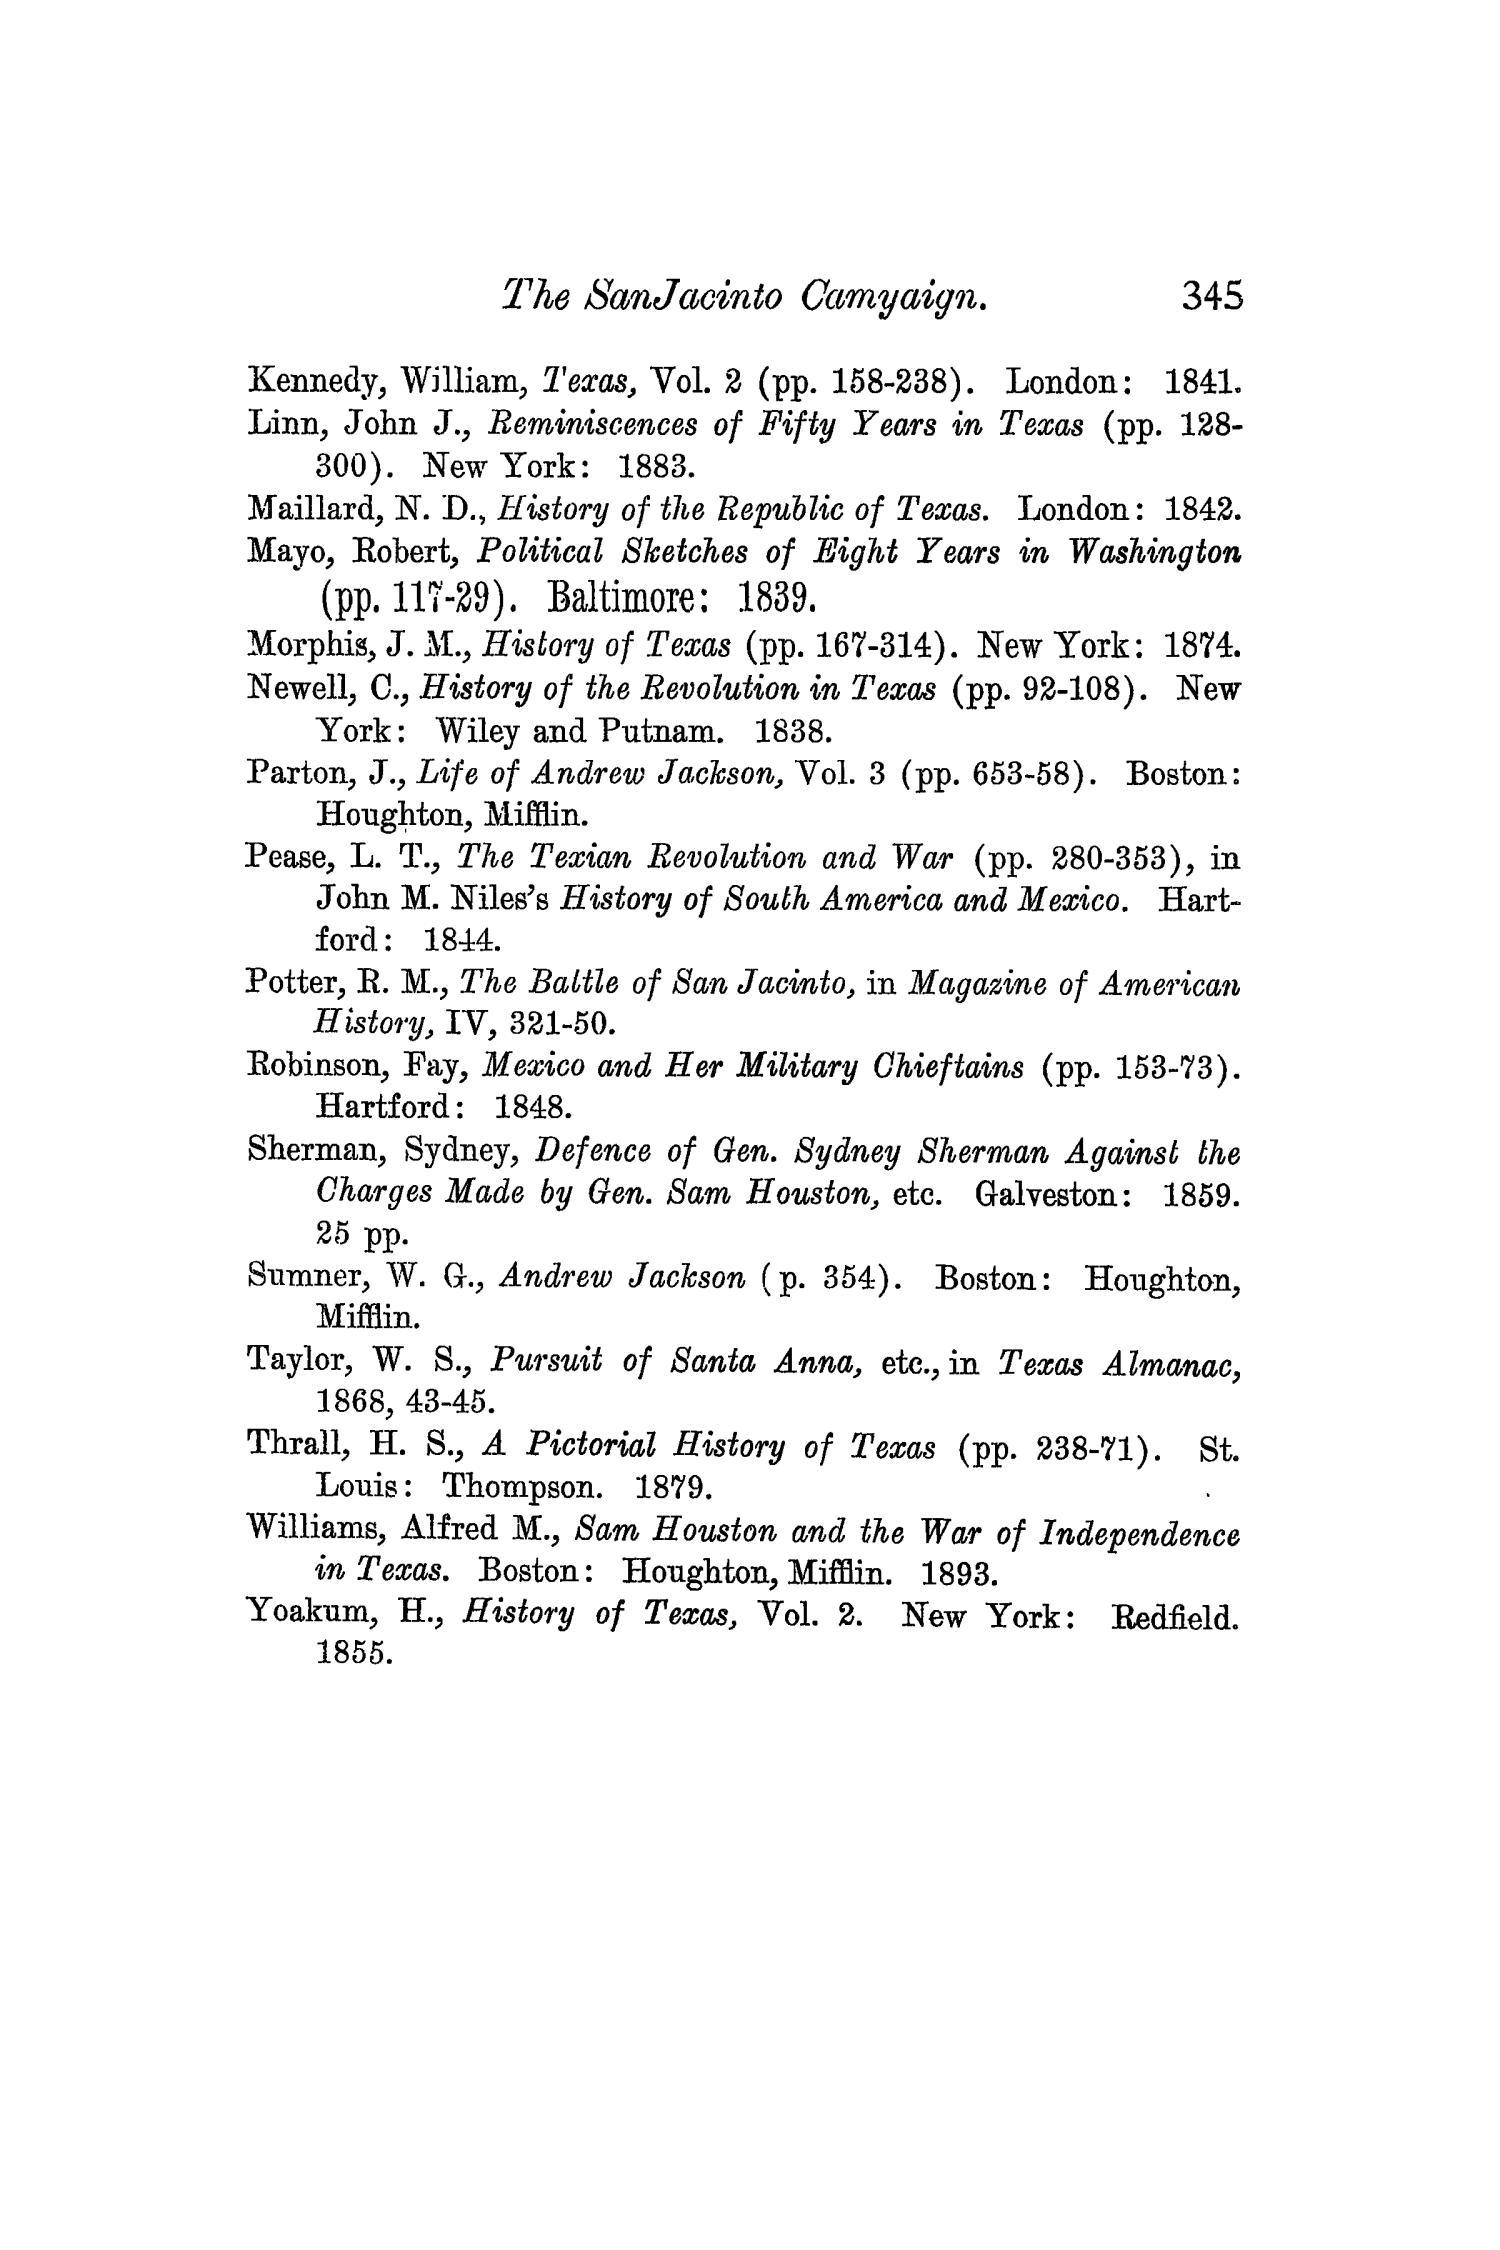 The Quarterly of the Texas State Historical Association, Volume 4, July 1900 - April, 1901
                                                
                                                    345
                                                